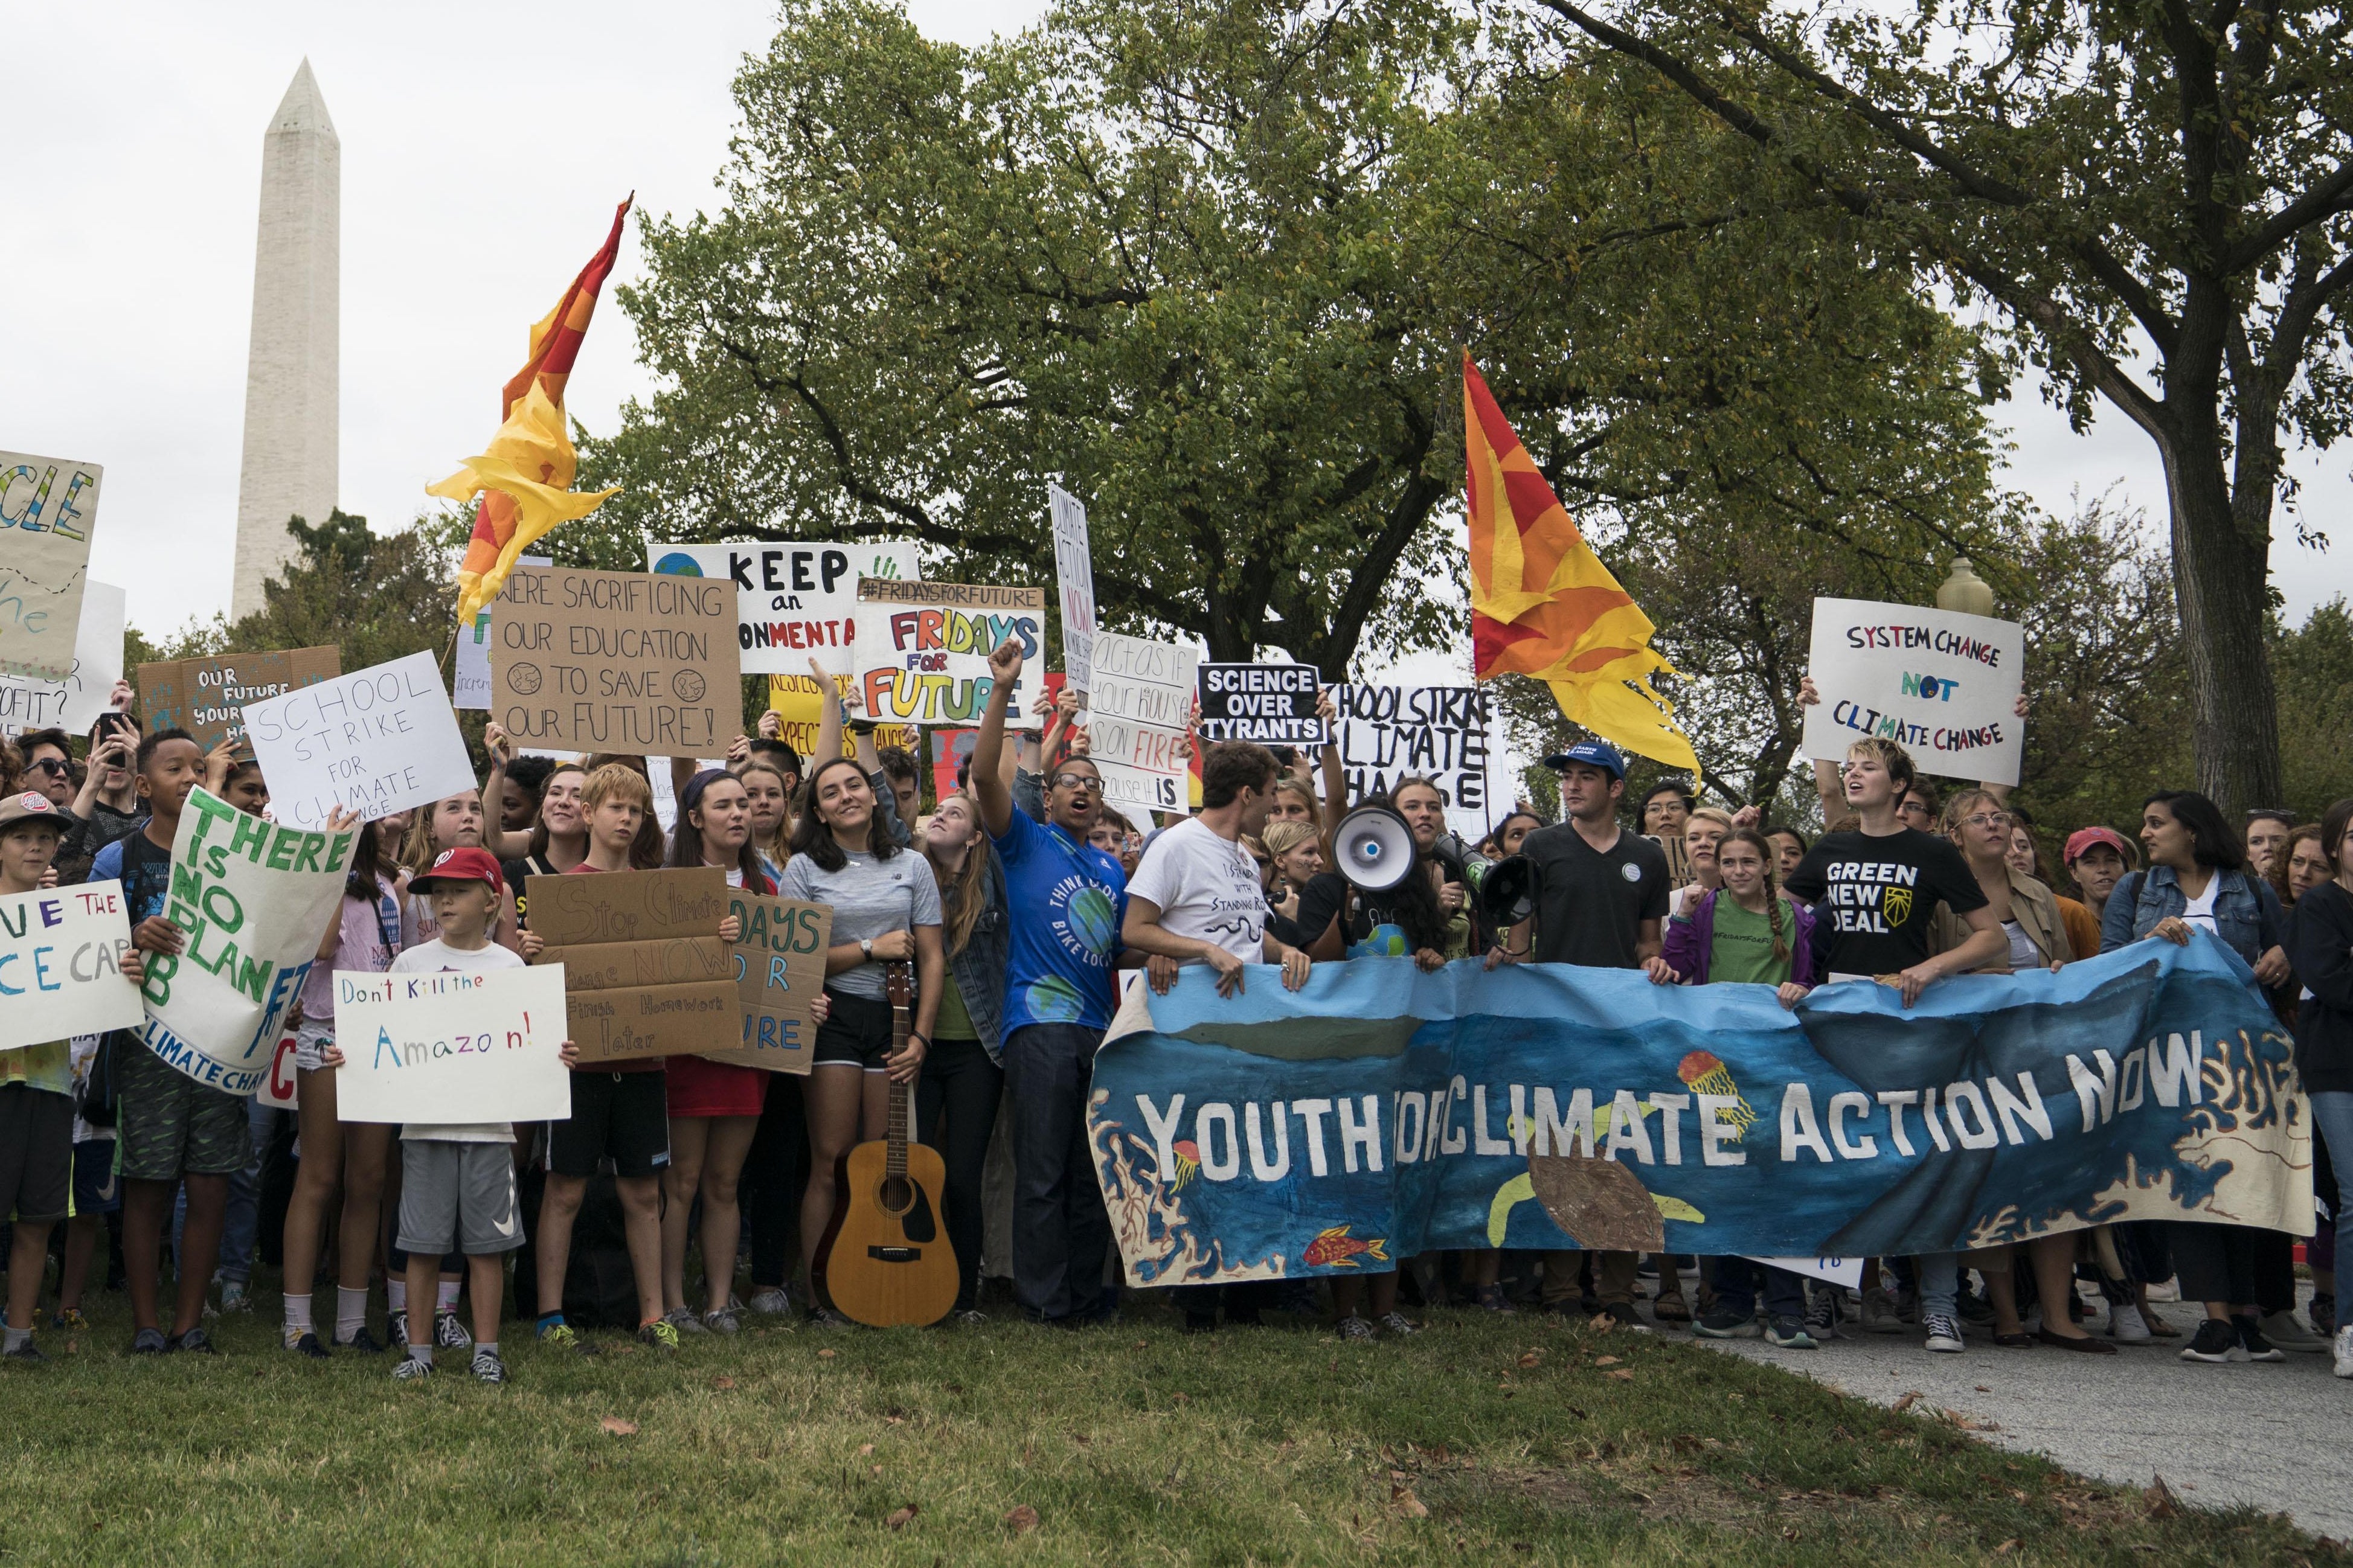 Student environmental advocates participate in a strike to demand that action be taken on climate change outside the White House.